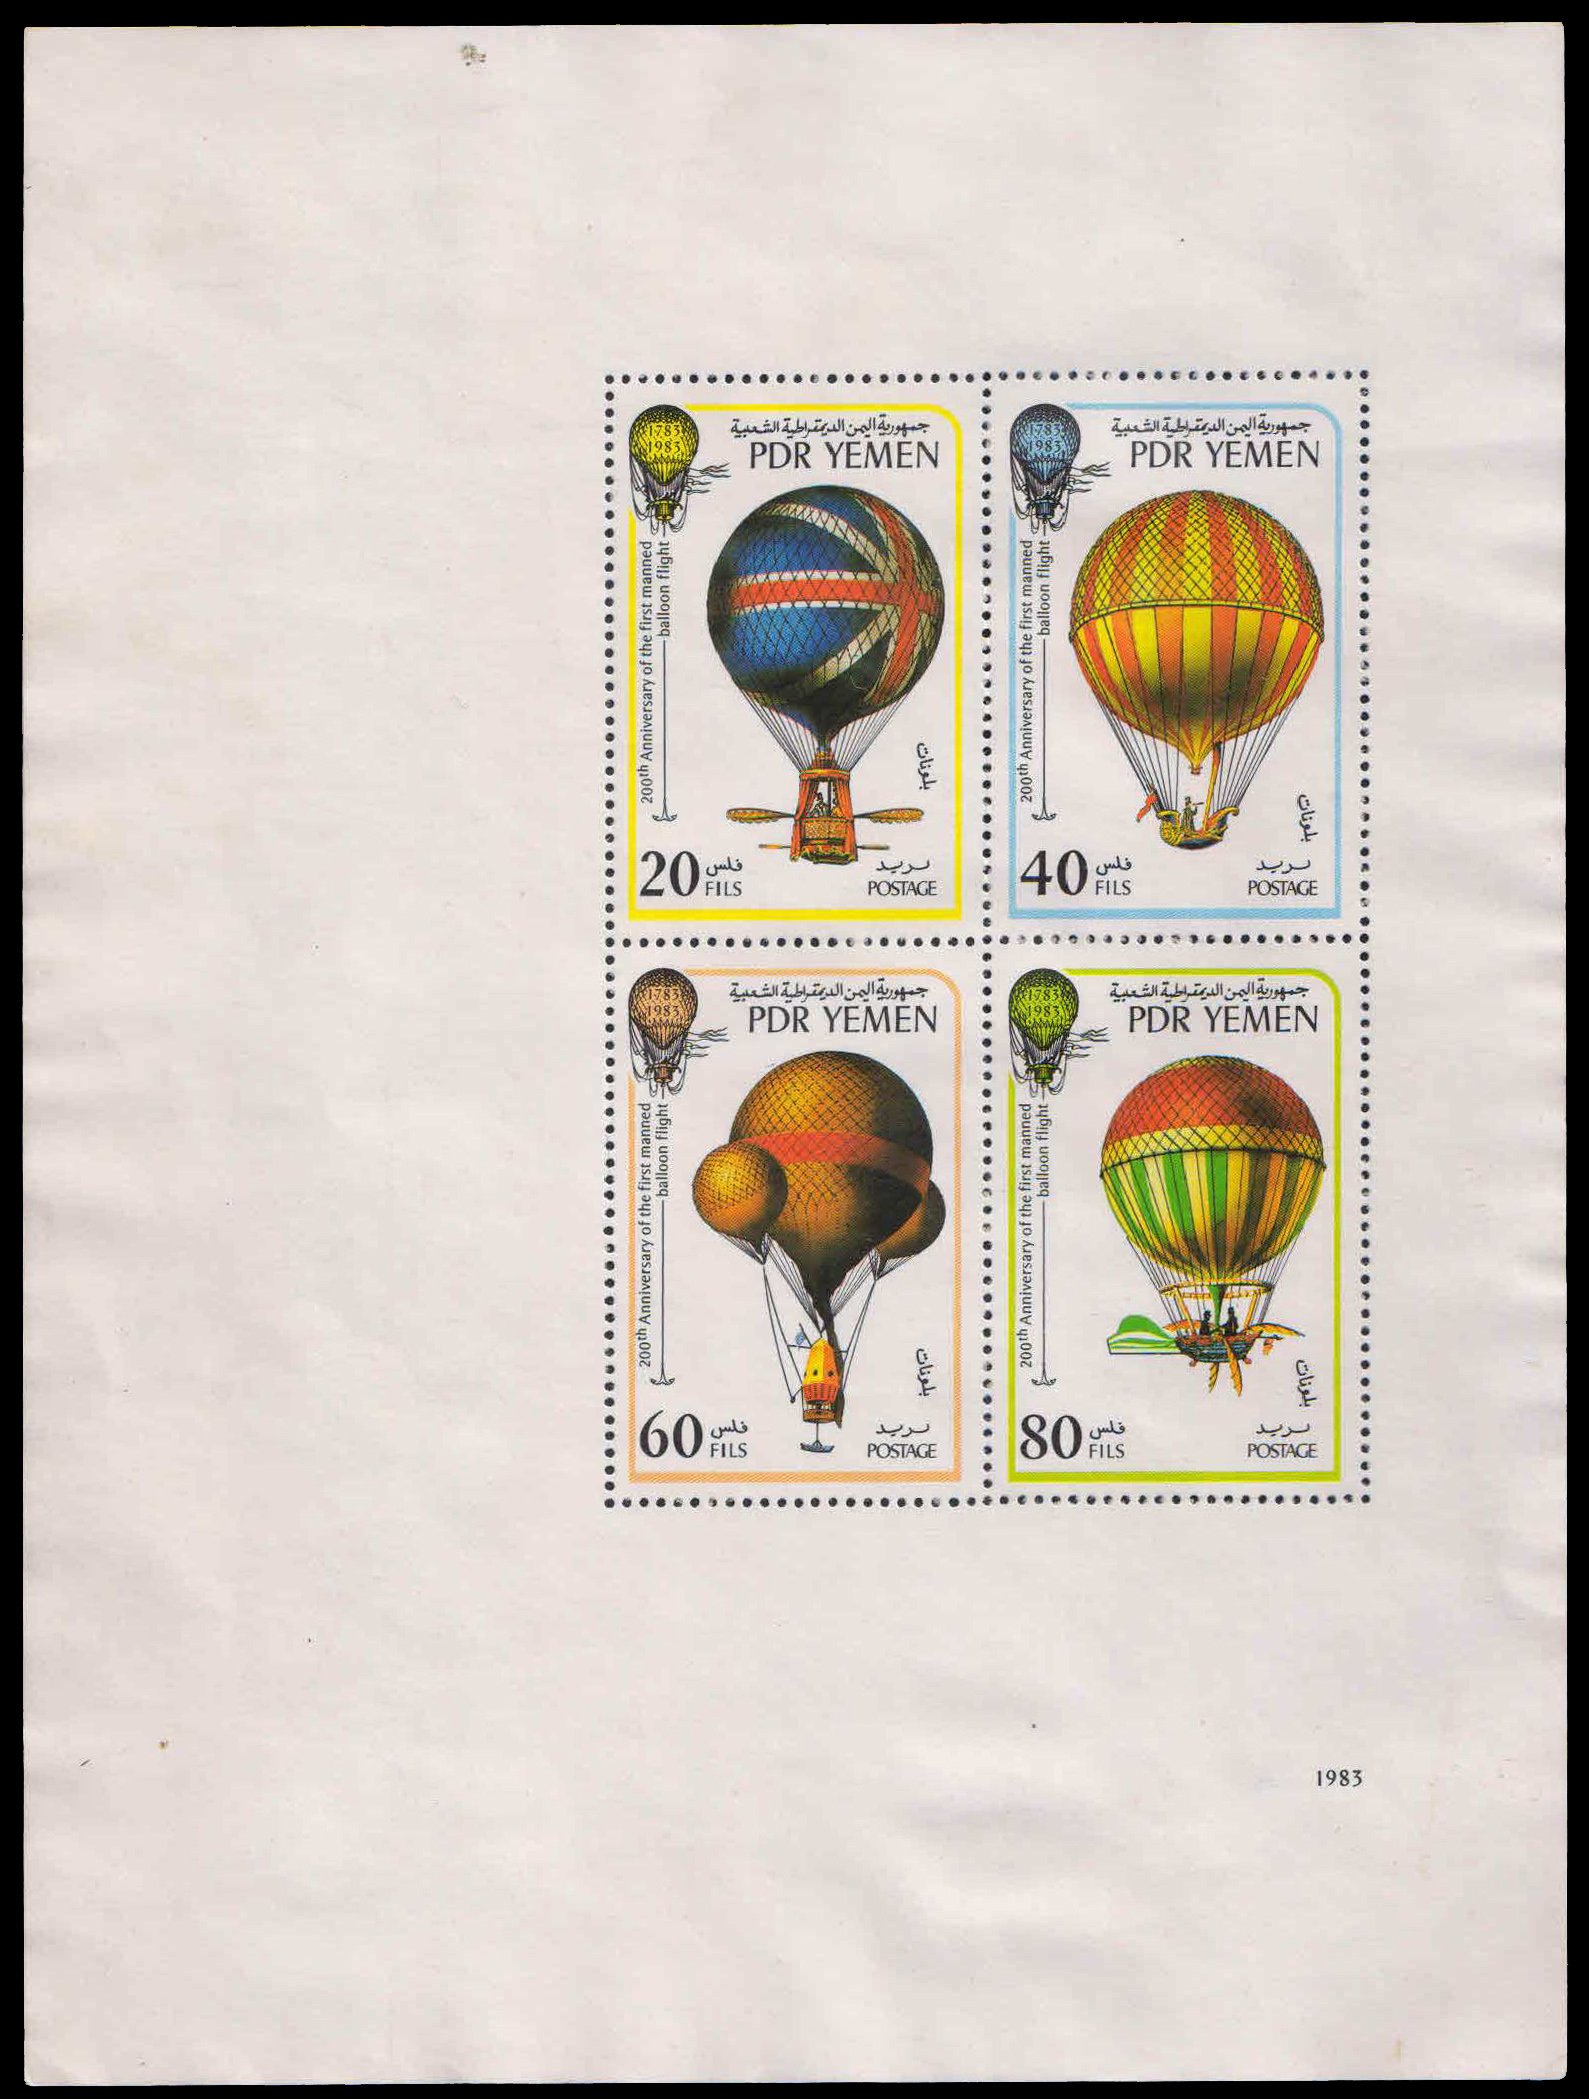 YEMEN PDR 1983, Bicent of Manned Flight, Balloons, Sheet of 4 Mint G/W, S.G. MS 312a